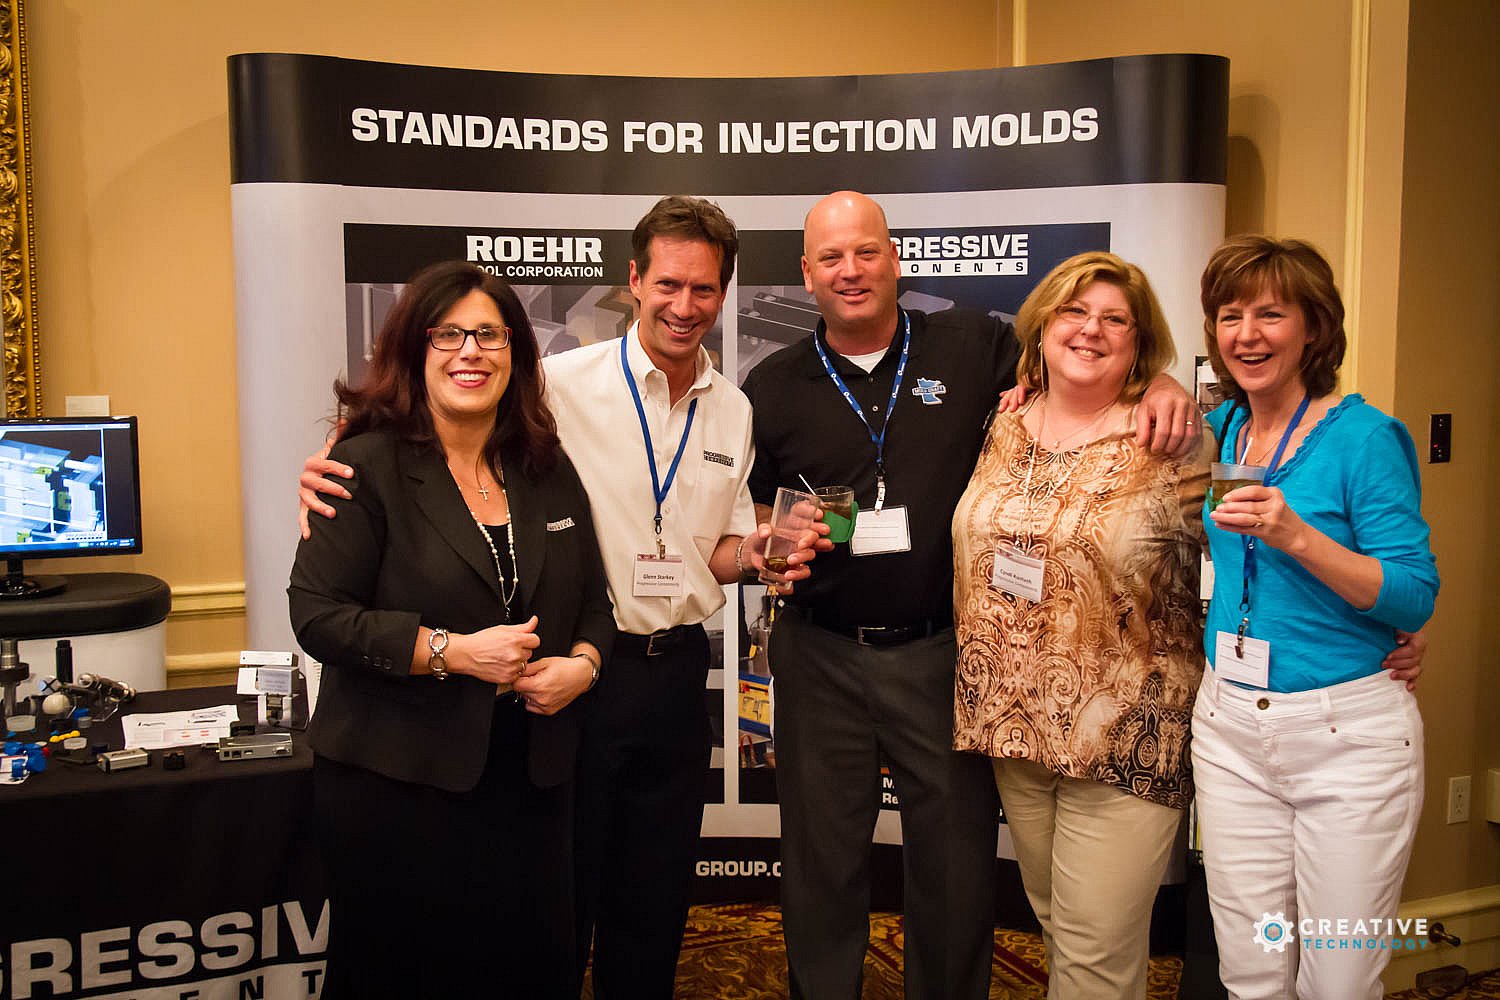 2014 Annual Conference - Milwaukee